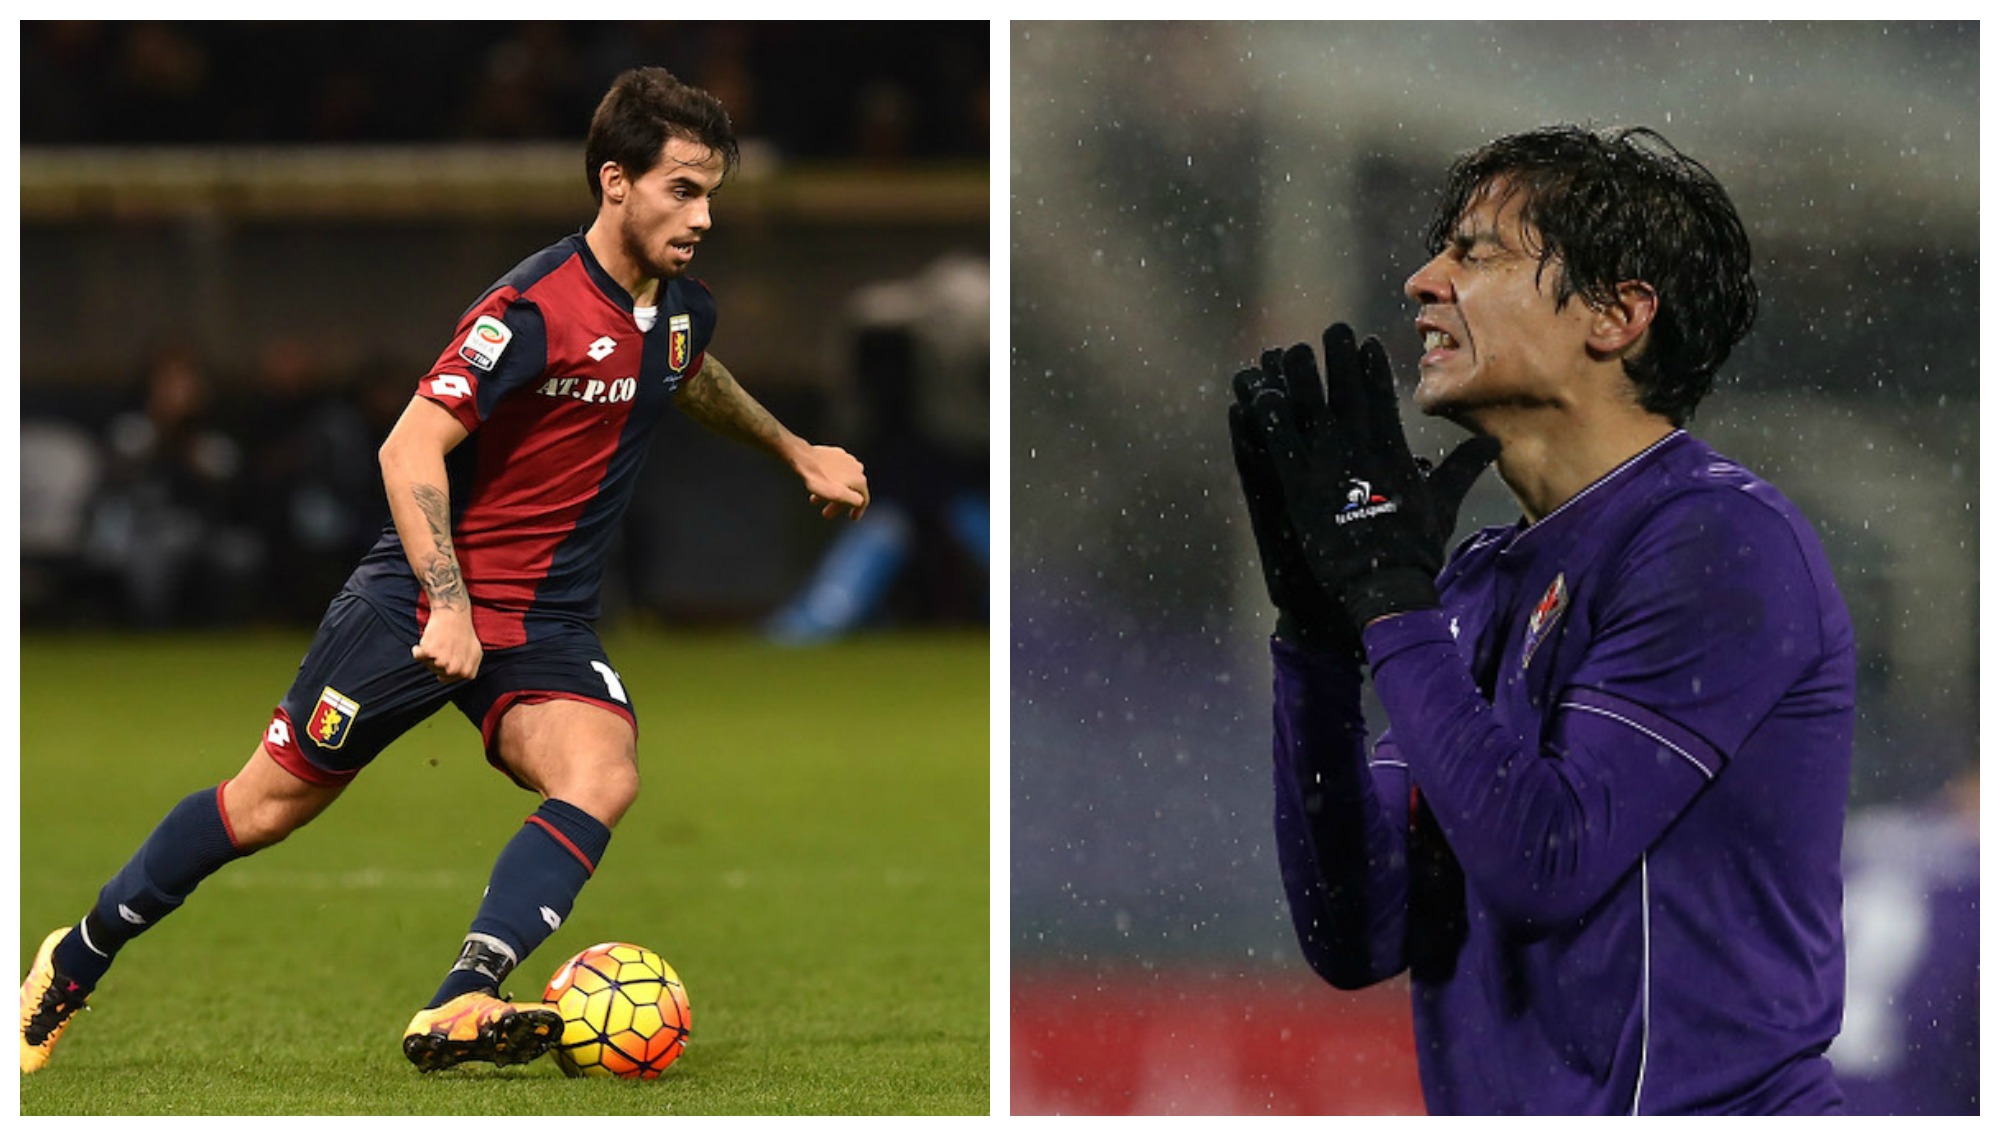 Suso/Fernandez swap an ambition for Milan | Getty Images